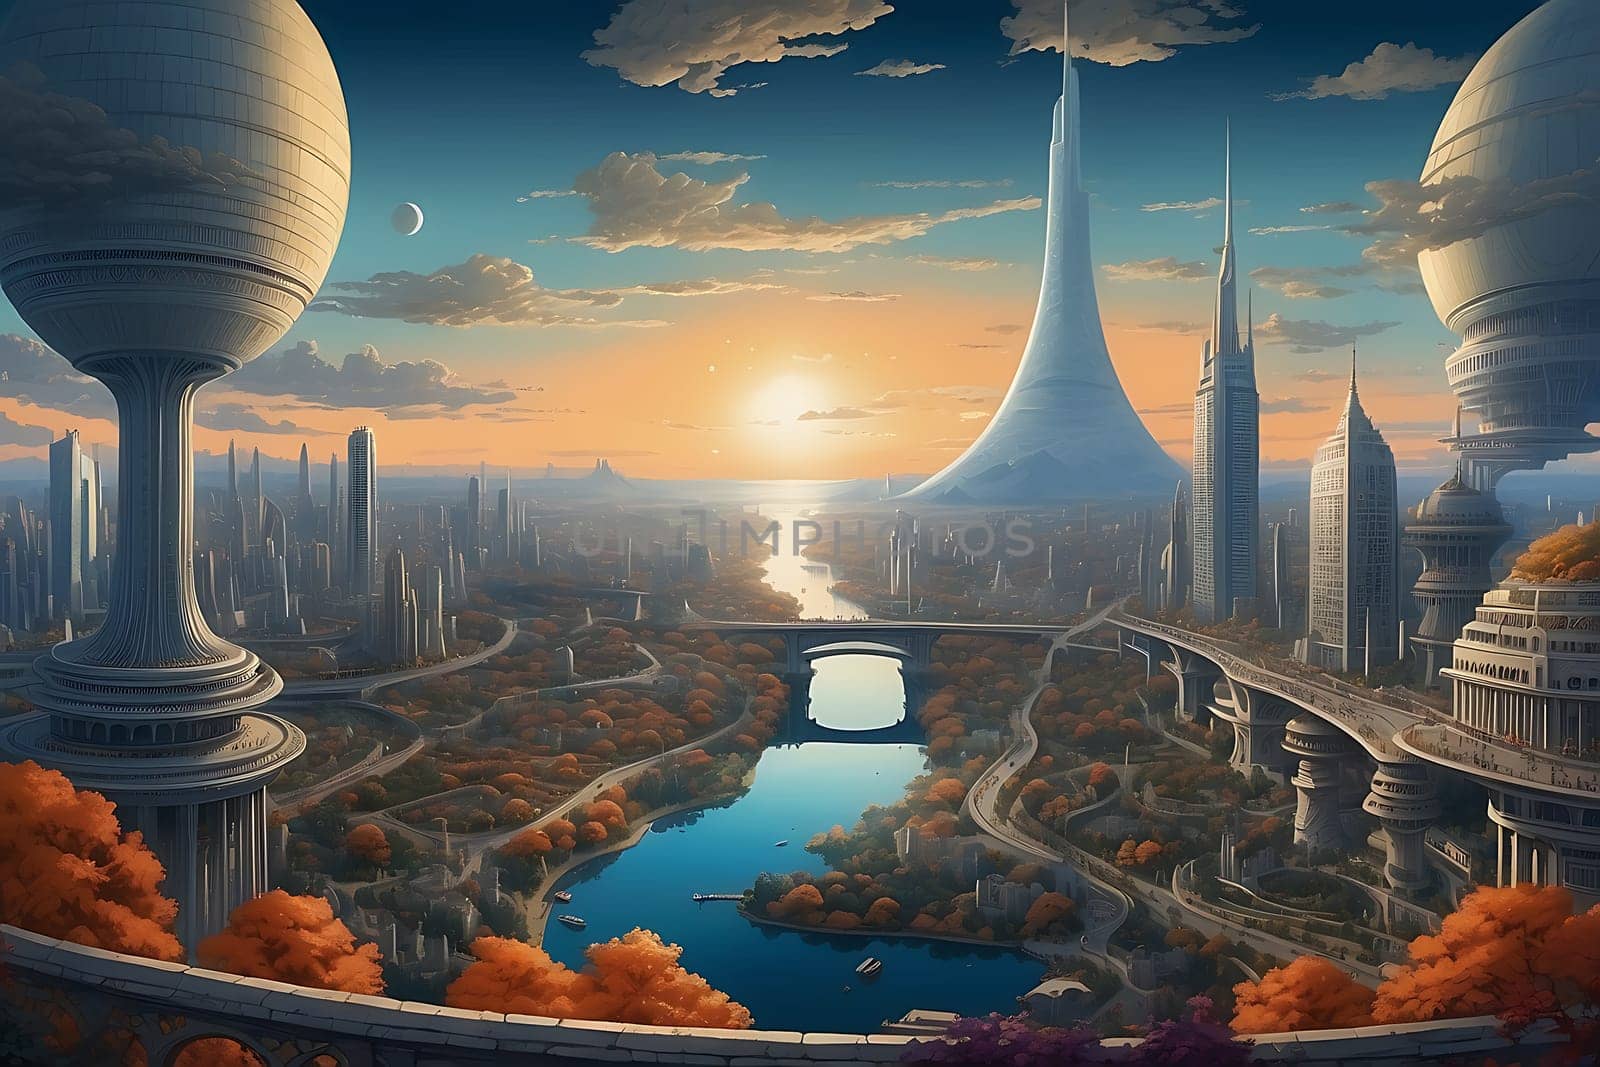 A mesmerizing painting portraying a futuristic city characterized by towering structures, complemented by a tranquil river that flows through the urban landscape.